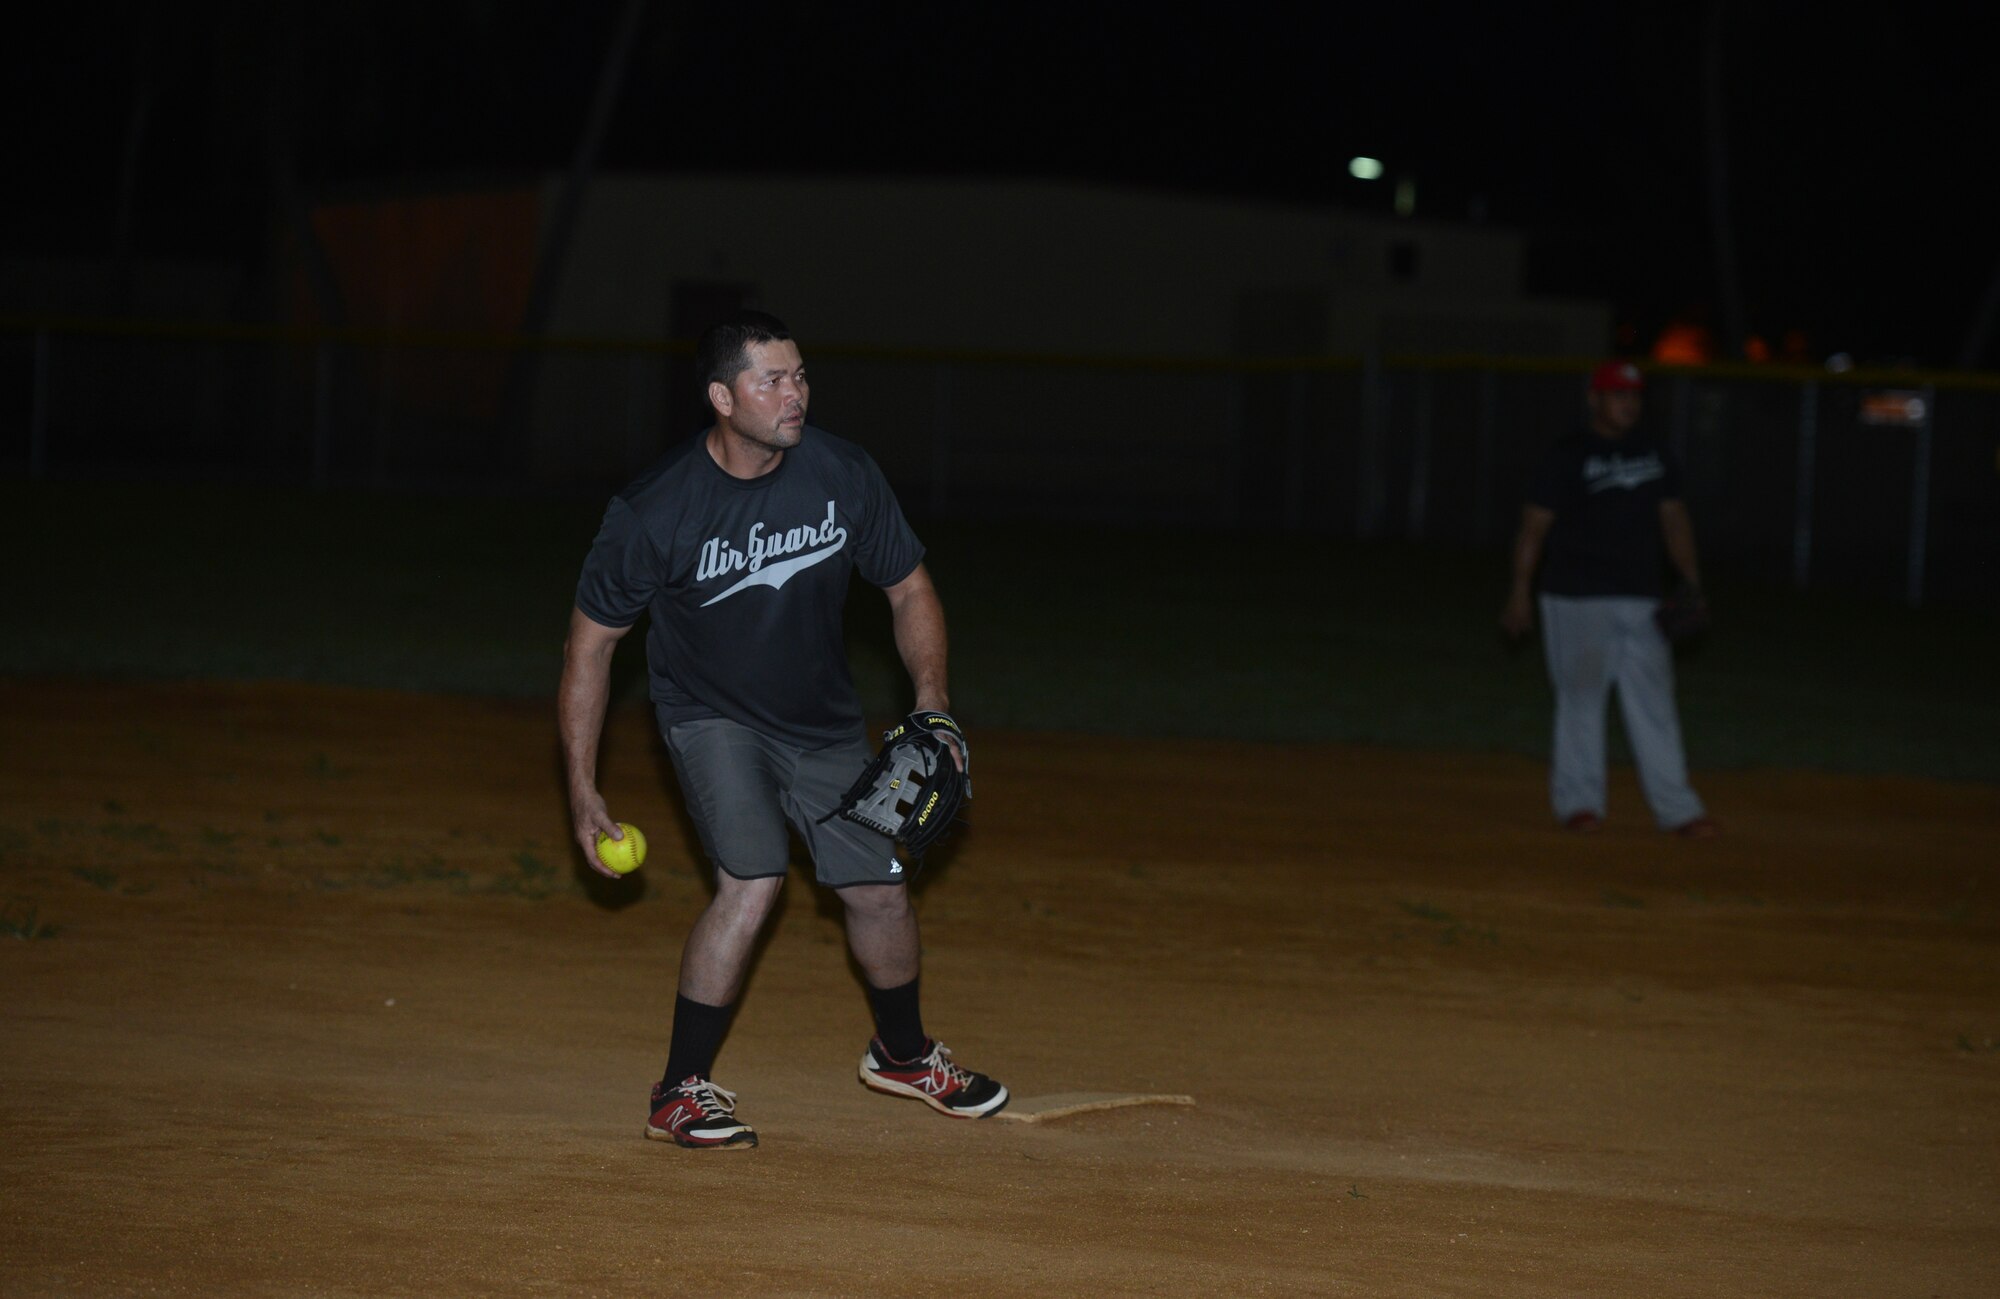 Cliff Raphael, Guam Air National Guard, gets ready to pitch to a batter during the intramural softball championship game between the 36th Civil Engineering Squadron and GU ANG July 28, 2015, at Andersen Air Force Base, Guam. The GU ANG won the game with a score of 16-12. (U.S. Air Force photo by Airman 1st Class Arielle Vasquez/Released)